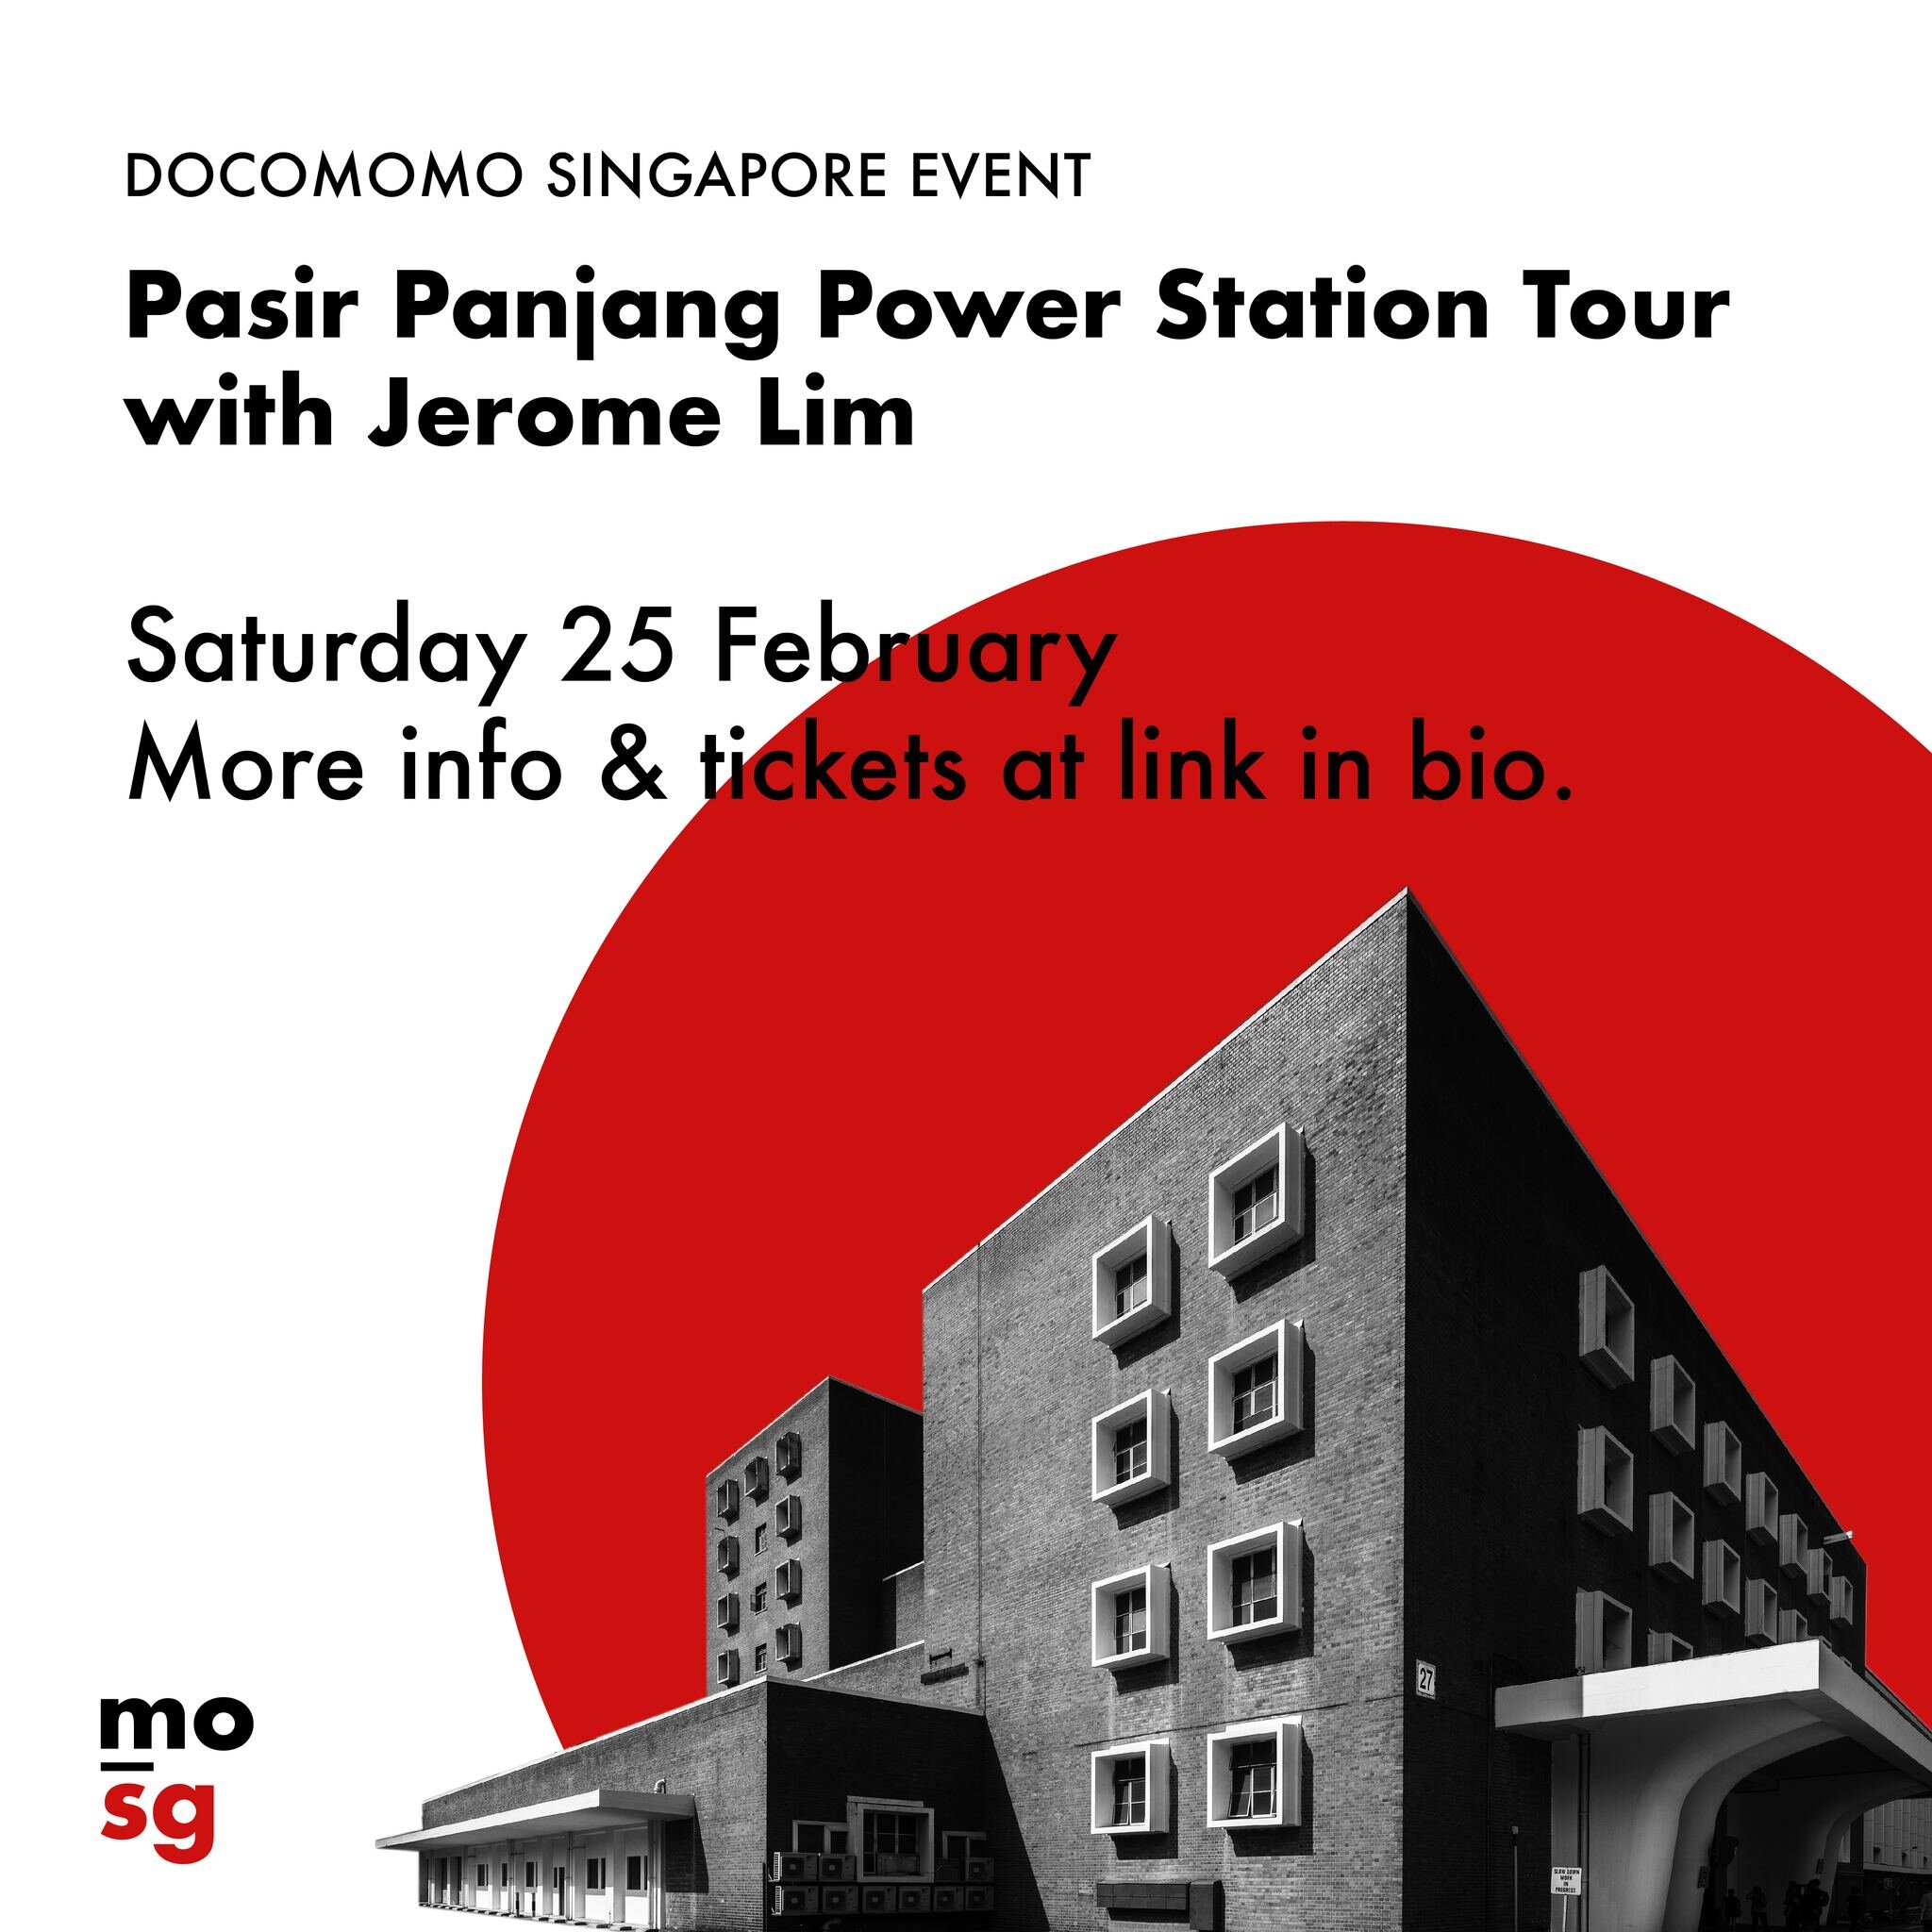 Tickets for the tour of the former Pasir Panjang Power Station is now open! Walk the grounds of this modernist building today and learn about its design, history and construction, led by heritage tour guide Jerome Lim. These tickets also grant access